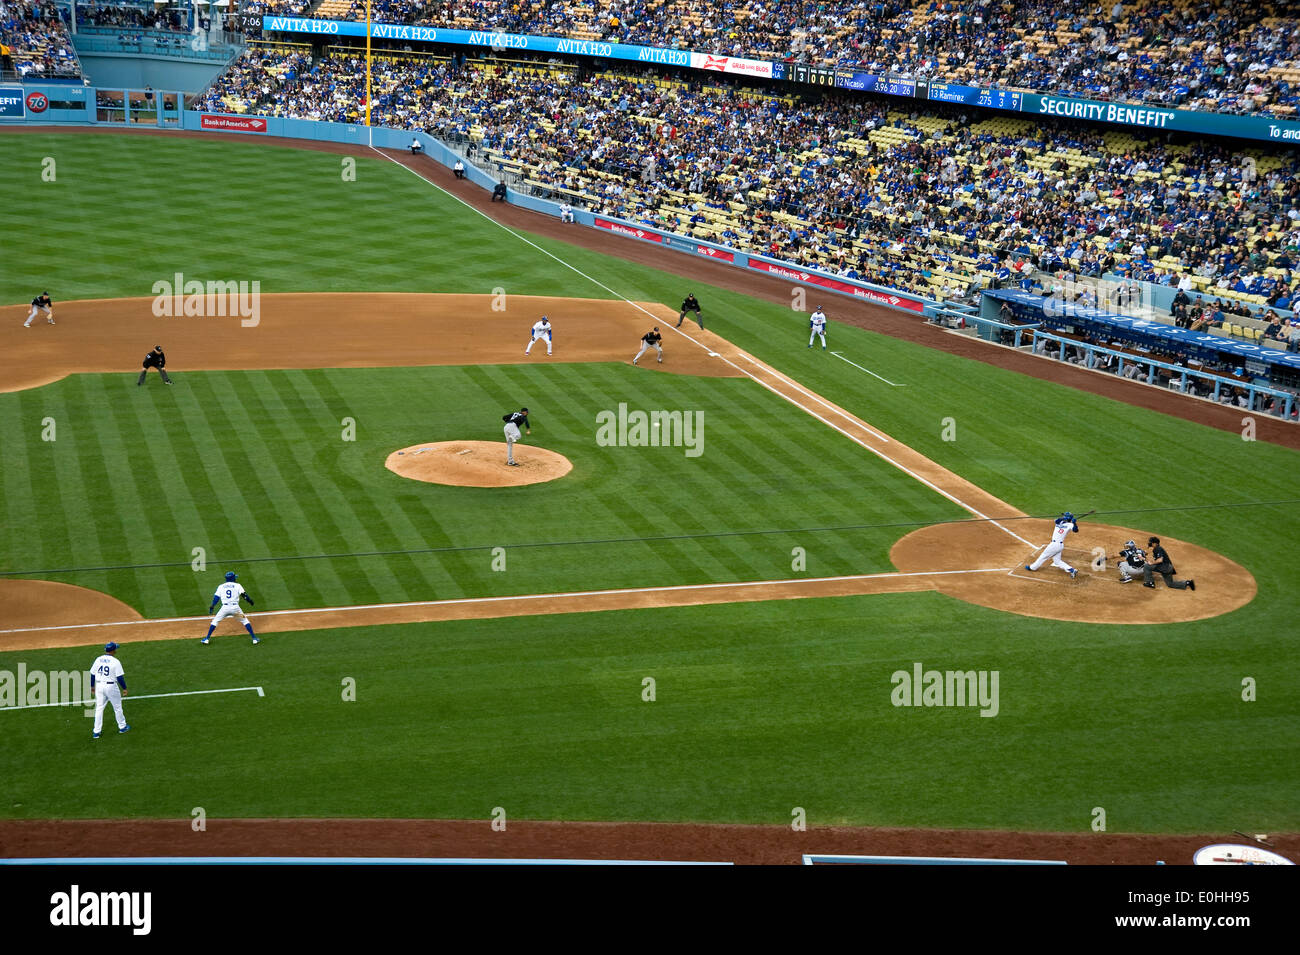 Live action with pitcher, batter and baserunners in a Major League baseball game at Dodger Stadium in Los Angeles, CA. Stock Photo